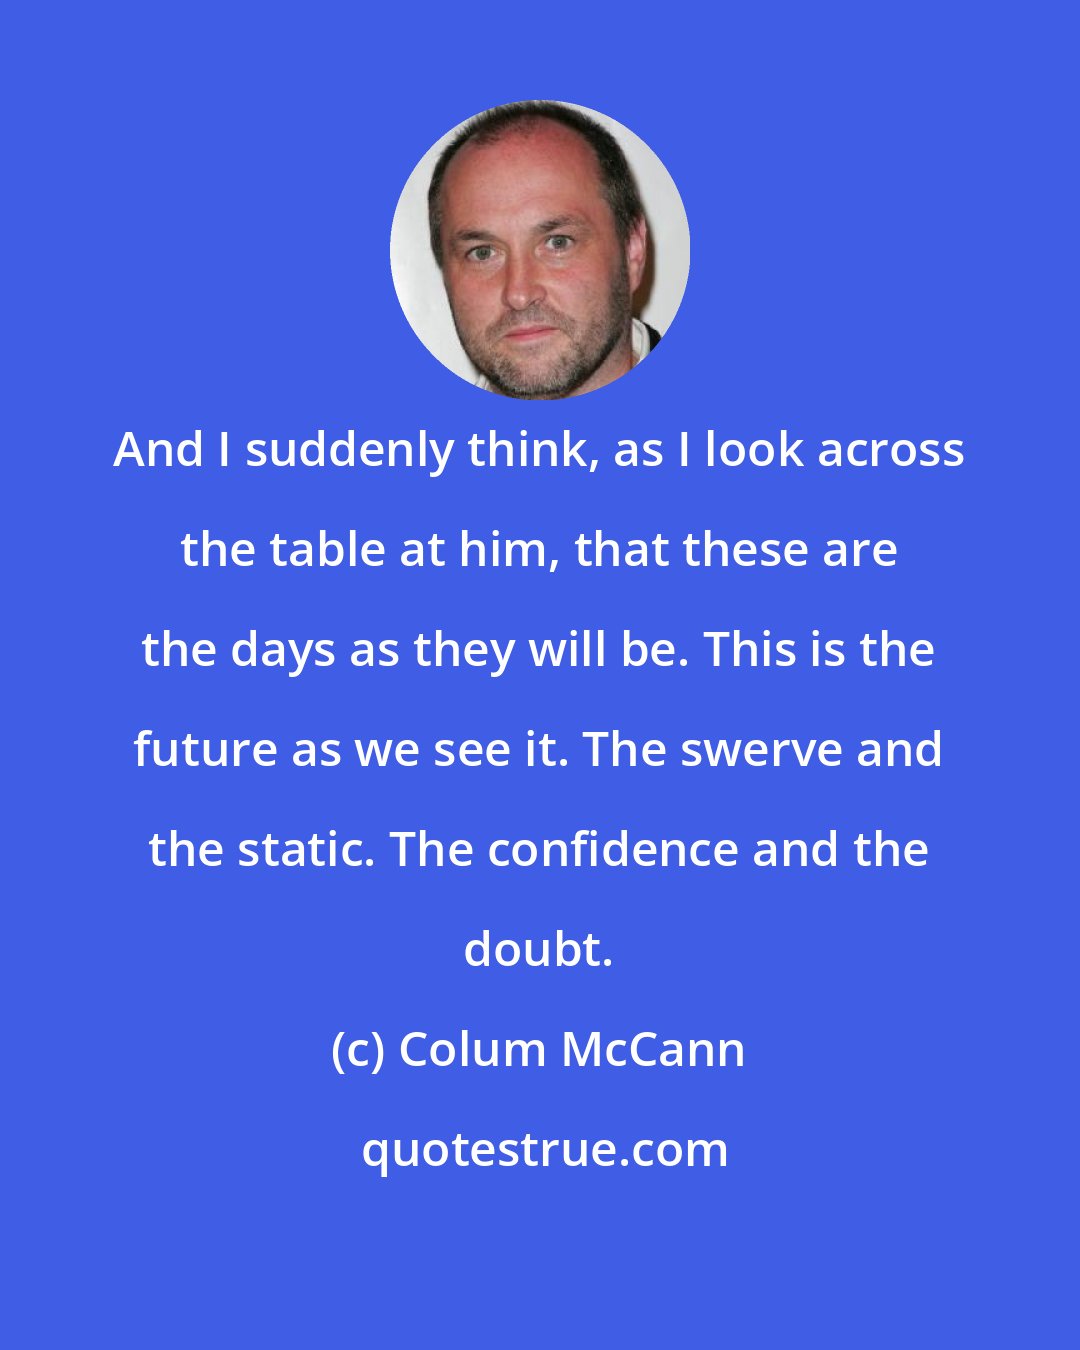 Colum McCann: And I suddenly think, as I look across the table at him, that these are the days as they will be. This is the future as we see it. The swerve and the static. The confidence and the doubt.